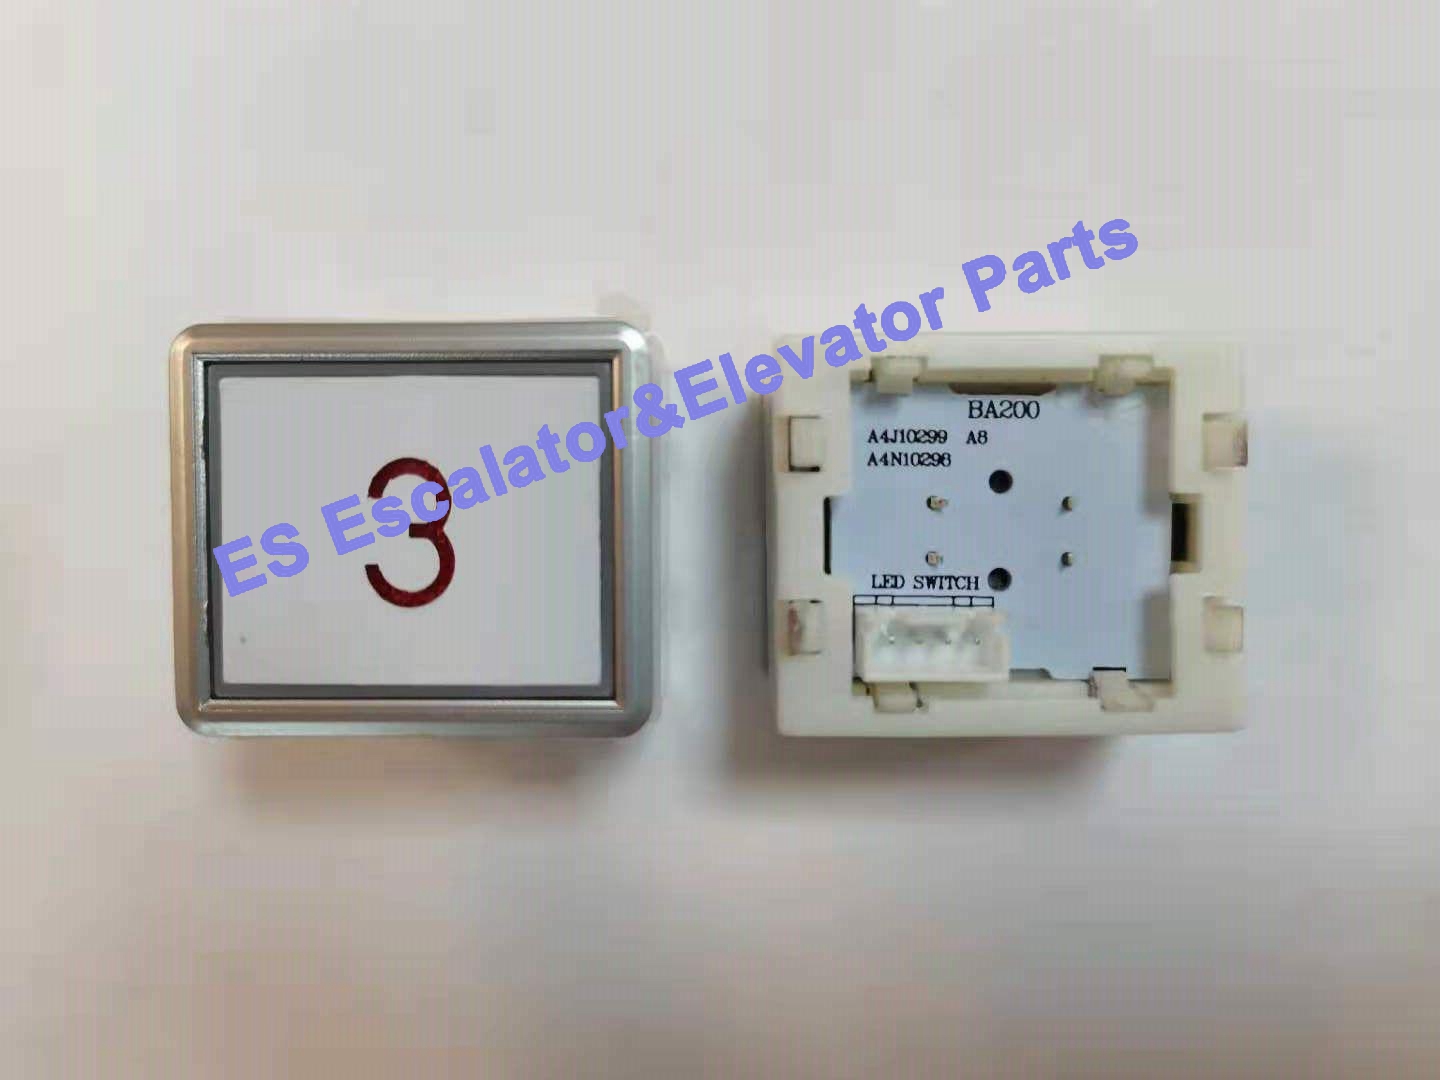 A4J10299 Elevator BST Button DC24V Use For Canny